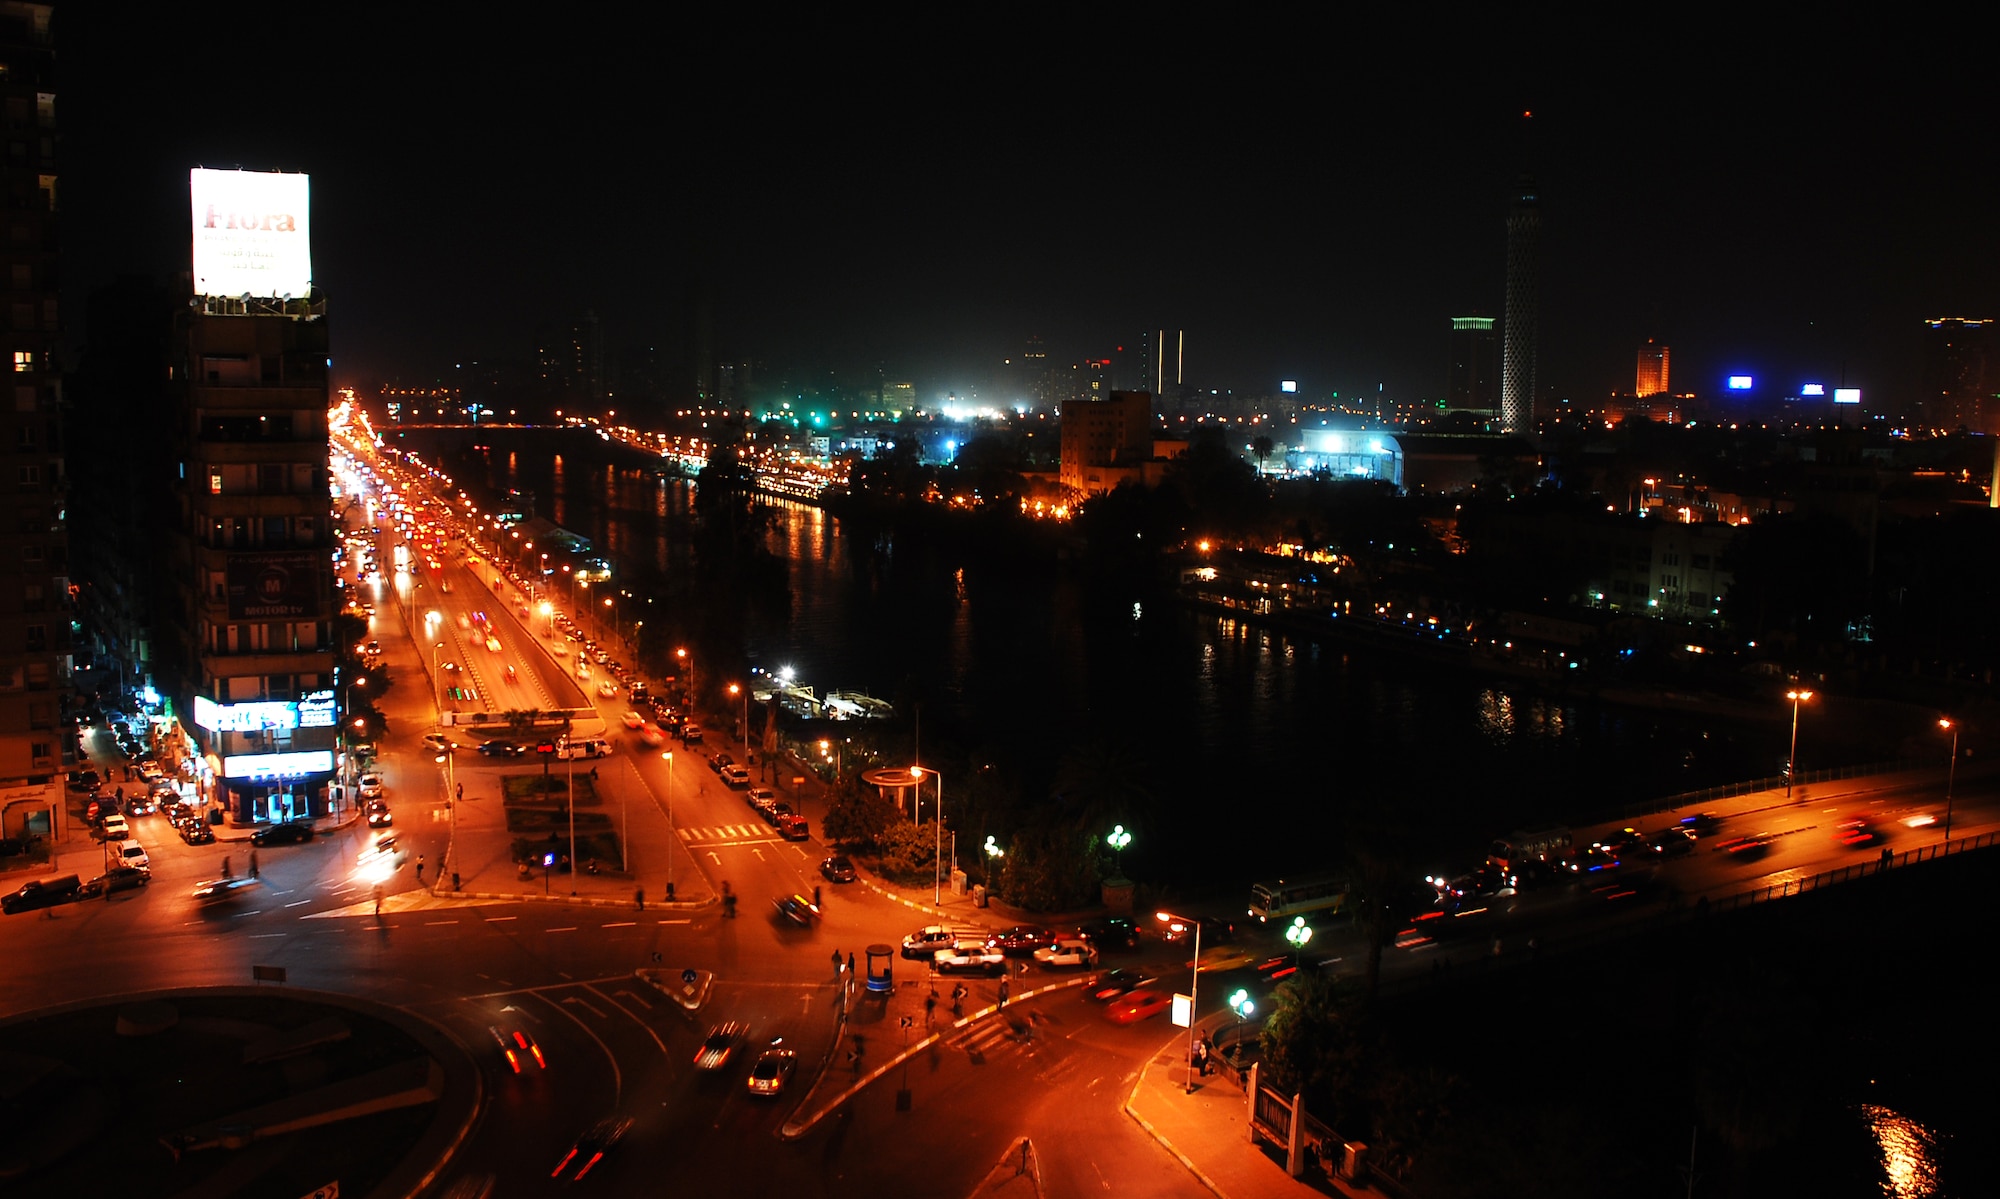 Cars crisscross through the inner city of Cairo Egypt, alongside the Nile River at night.  Cairo is the capital of Egypt and the largest city in Africa as well as one of the most densely populated cities in the world. Cairo is the center of the region’s political and cultural life and is largely associated with Ancient Egypt due to the proximity of the Great Sphinx and the Pyramids of Giza. (U.S. Air Force photo/Senior Airman Sara Csurilla)